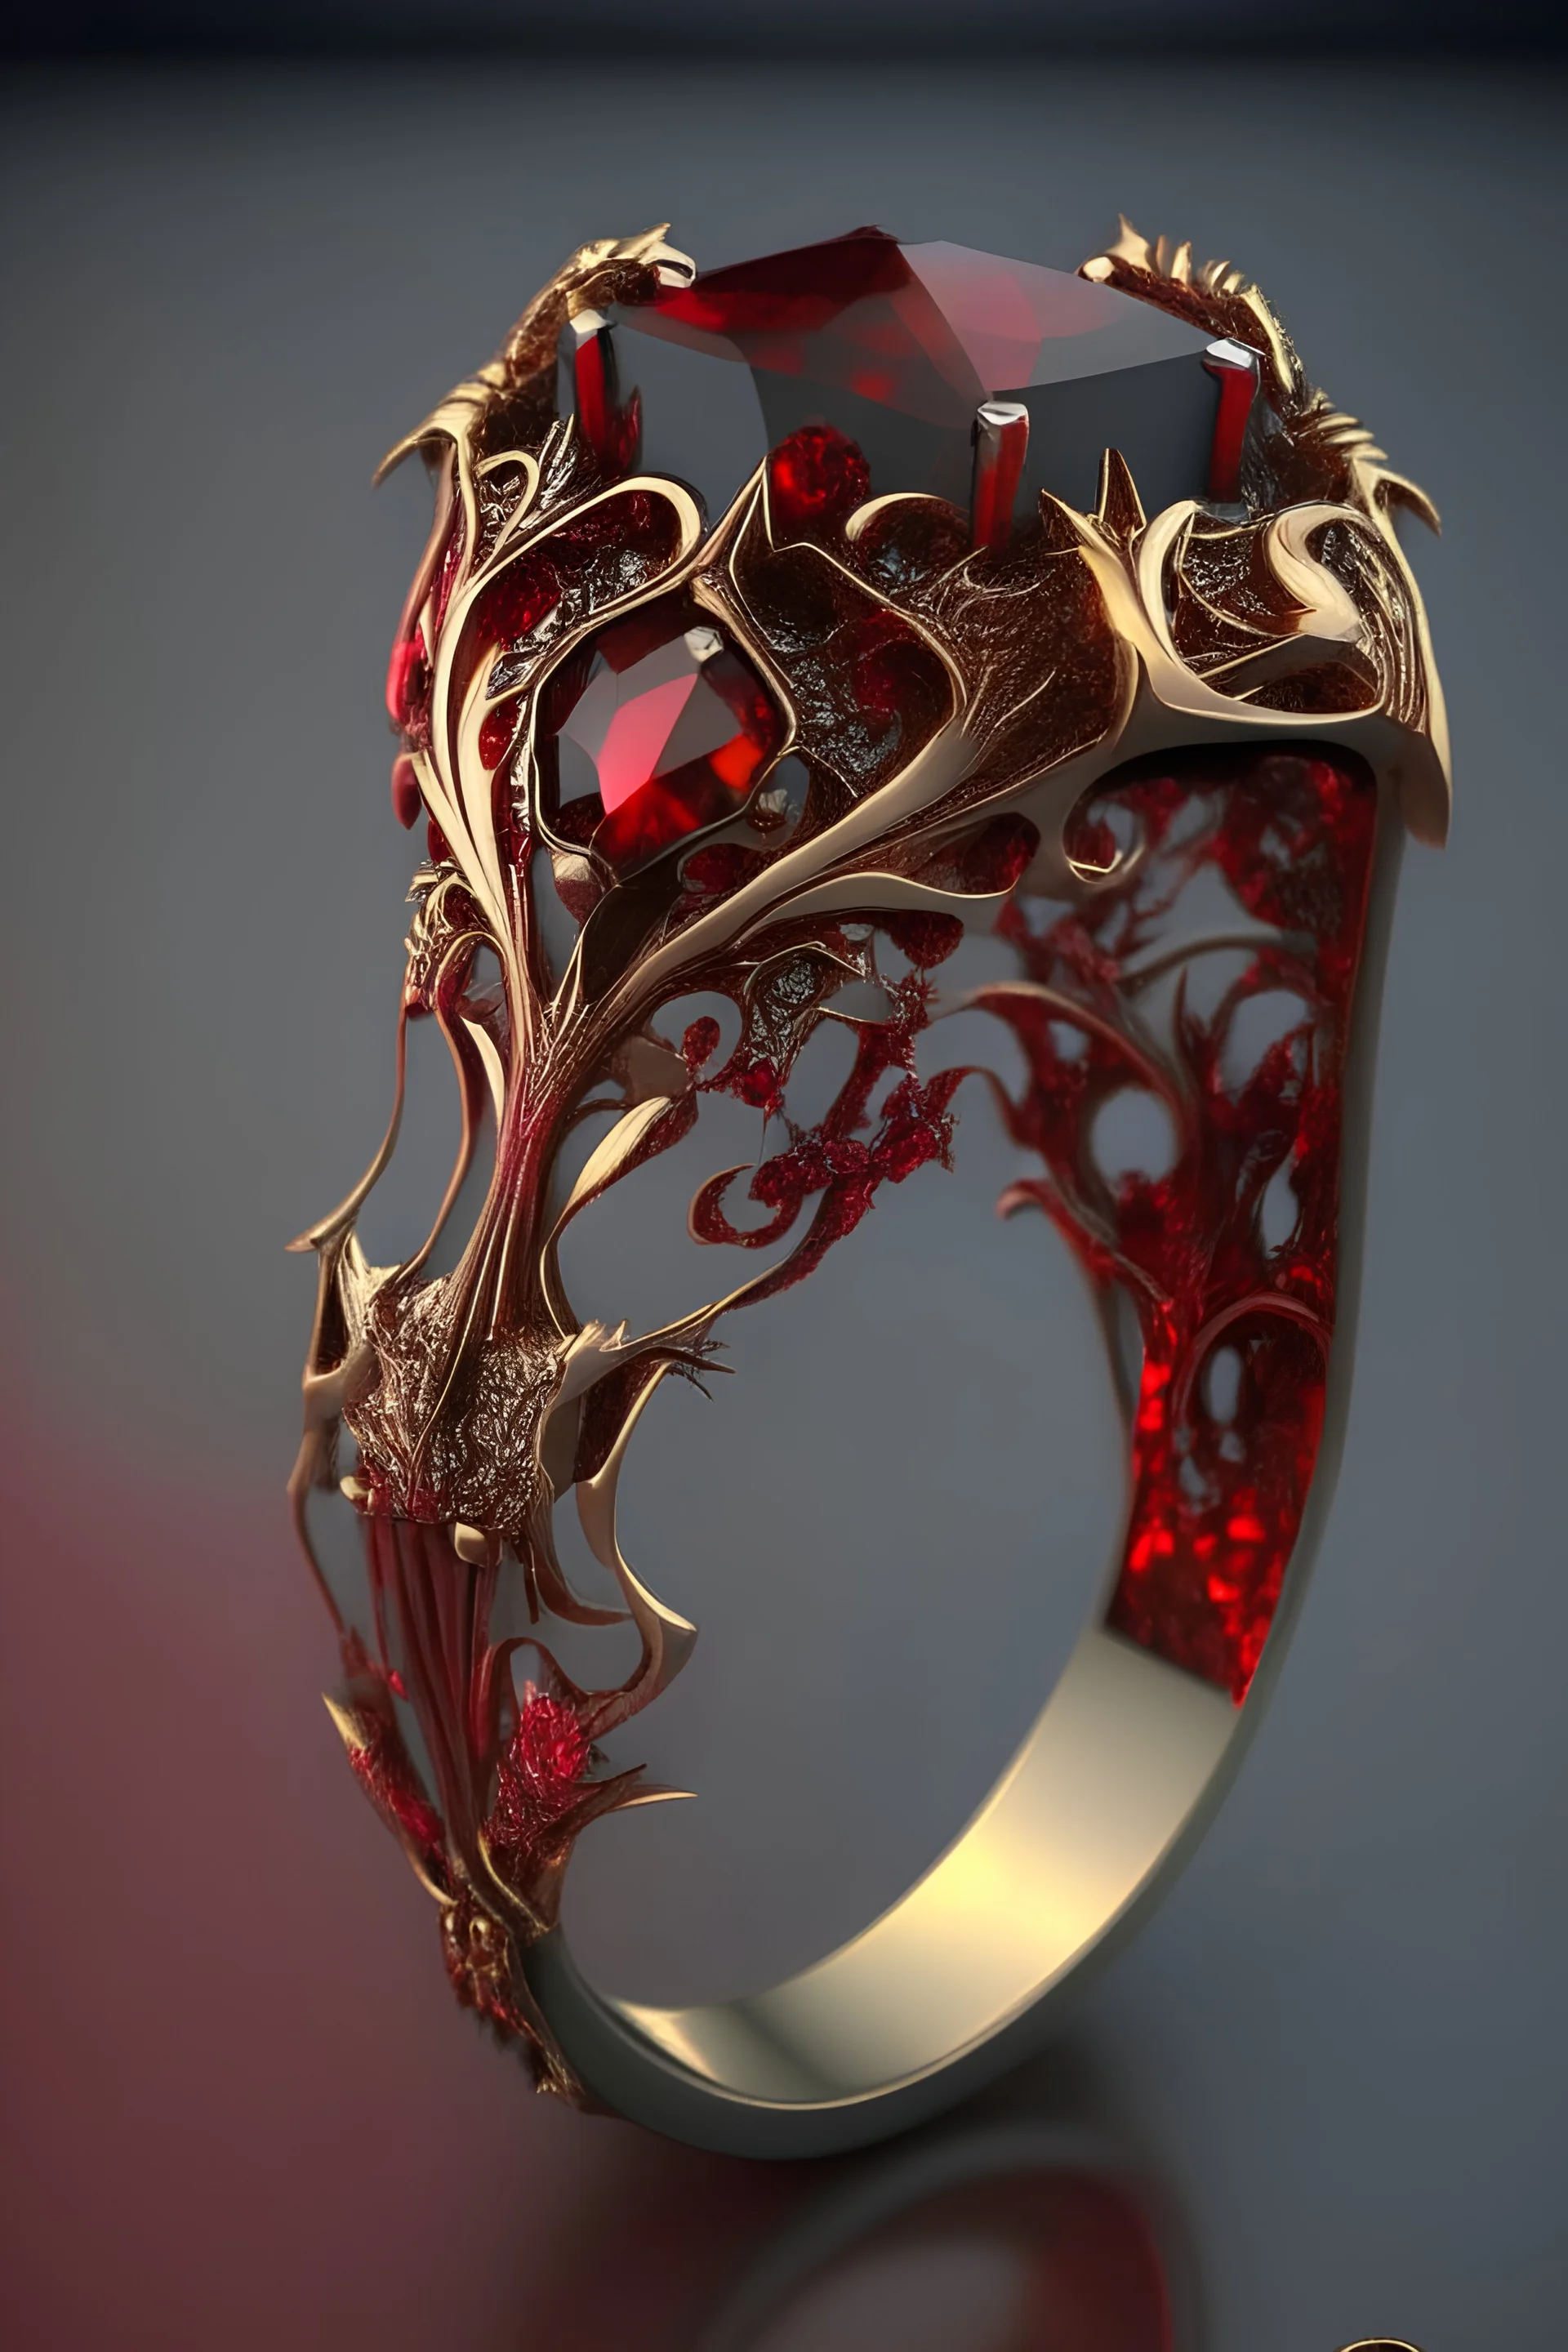 Blood inspired jewellry ring design